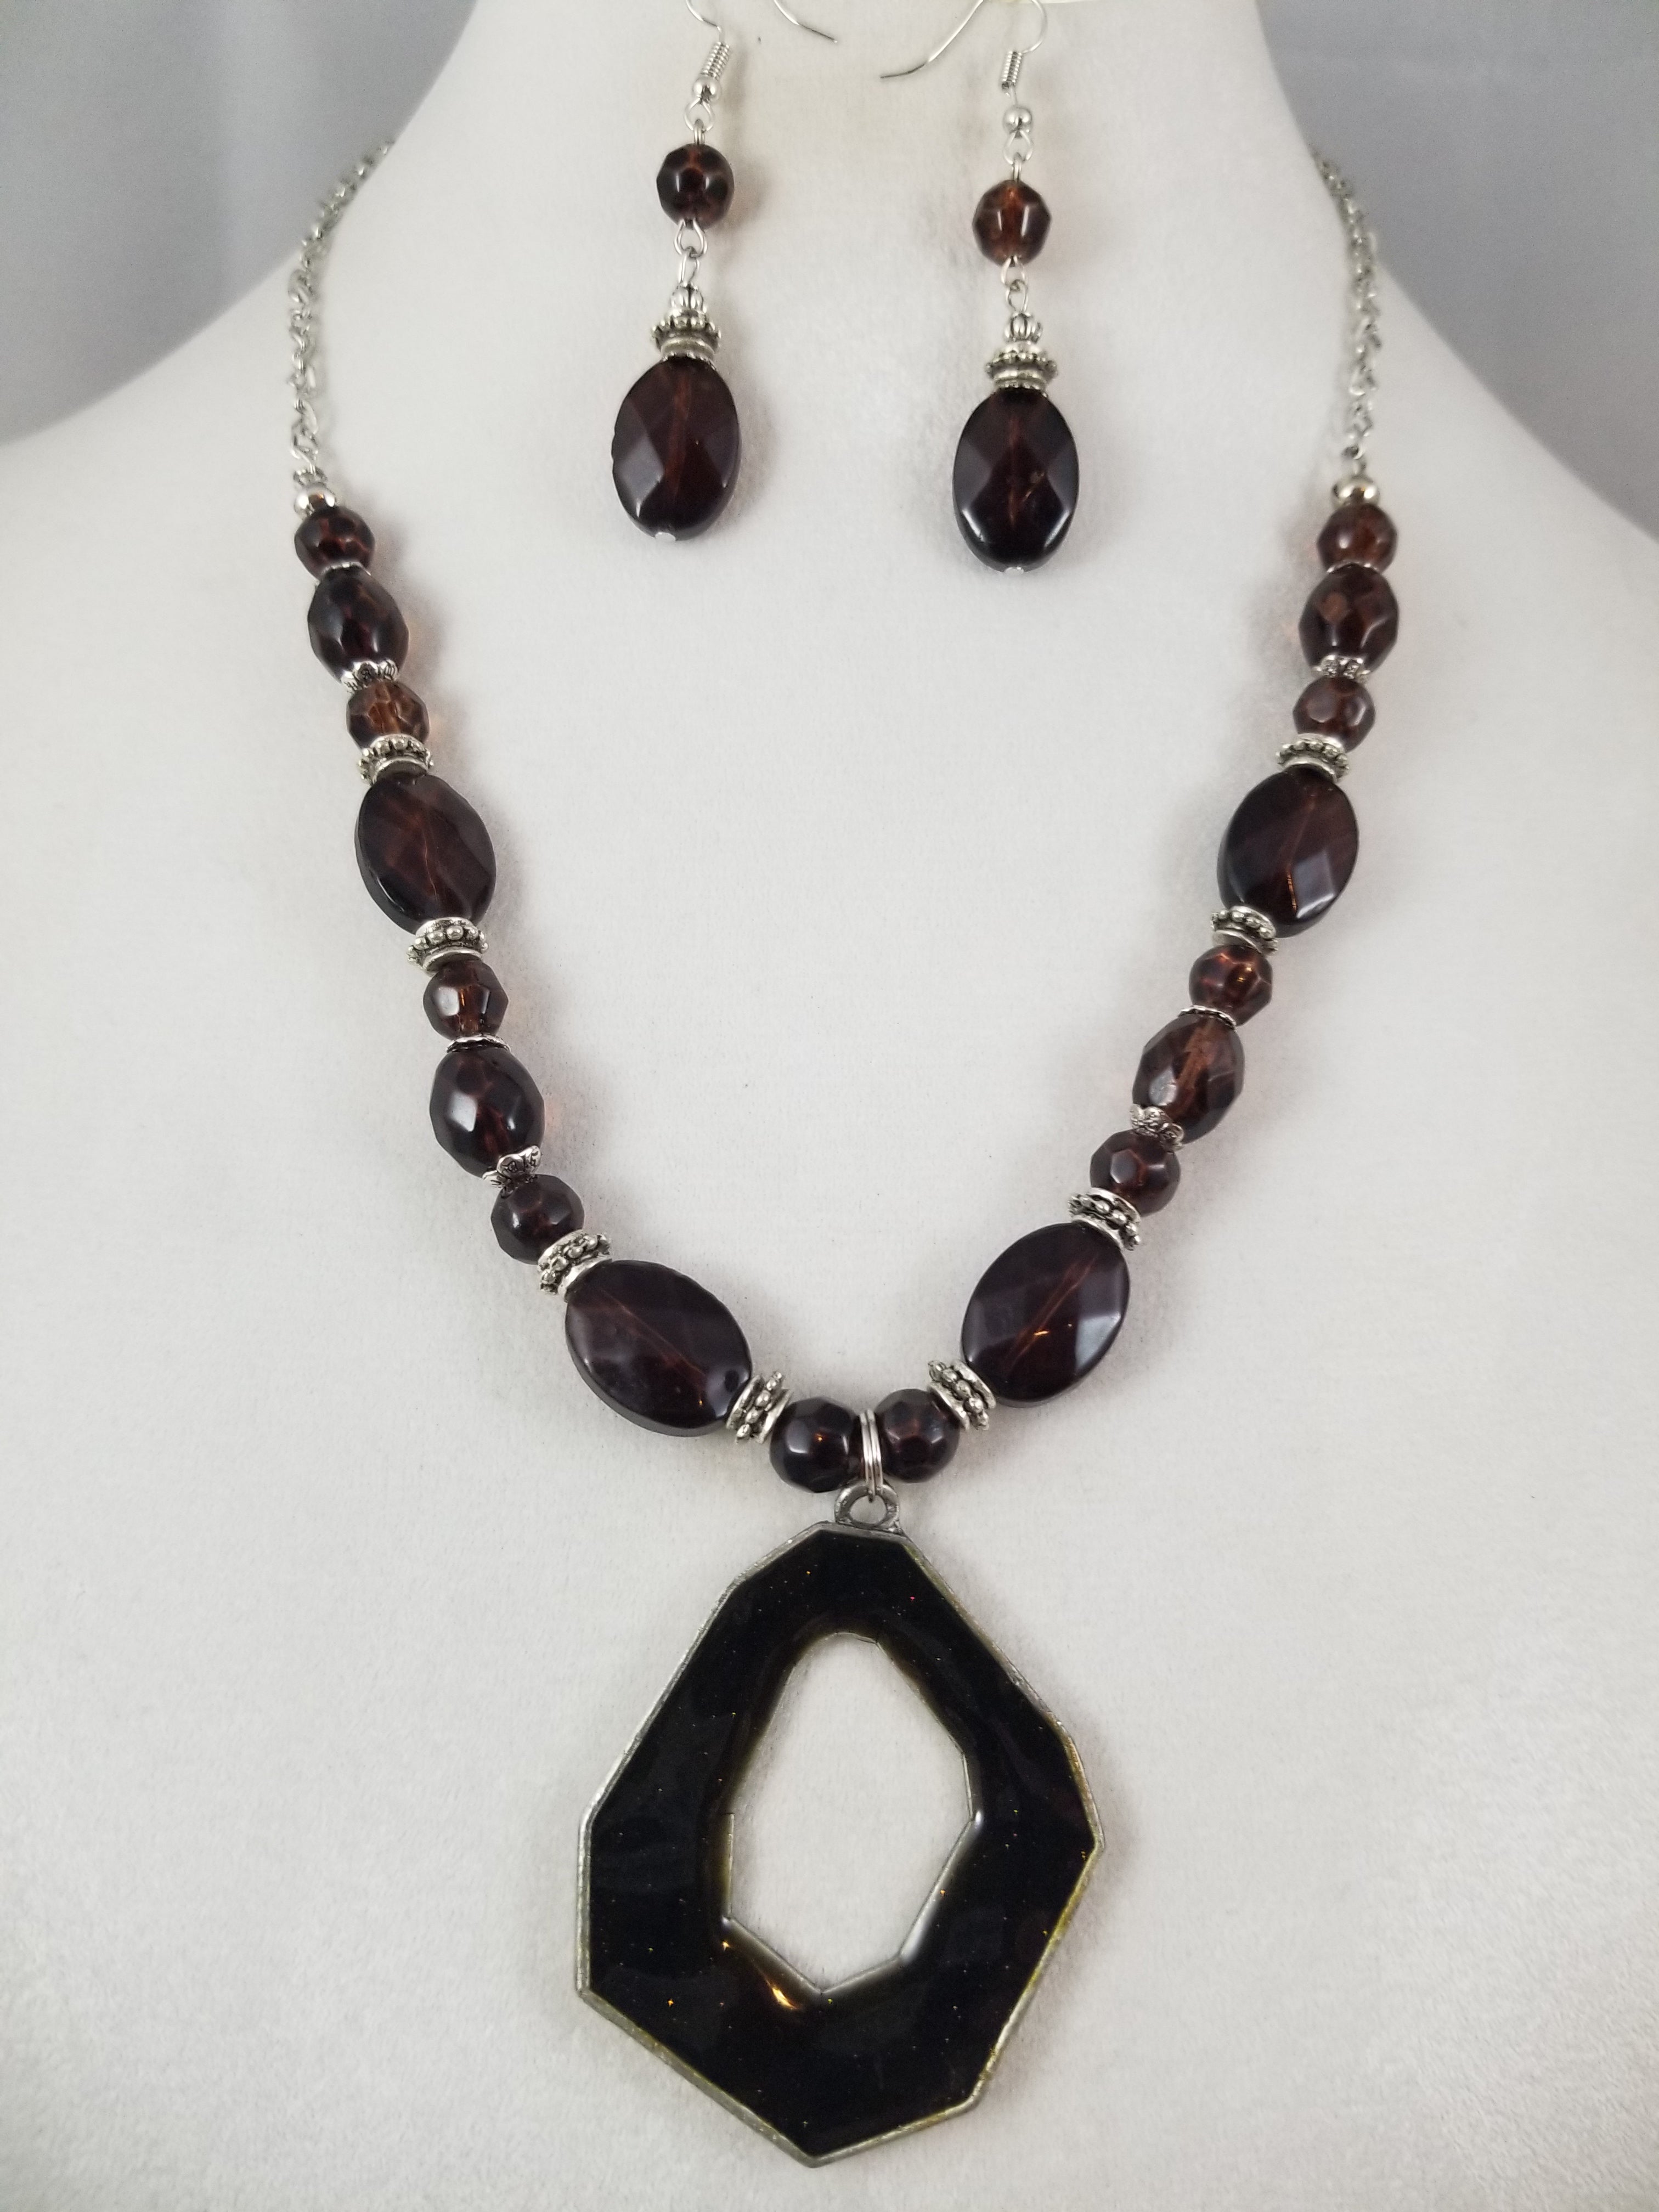 Root Beer Necklace with Earrings